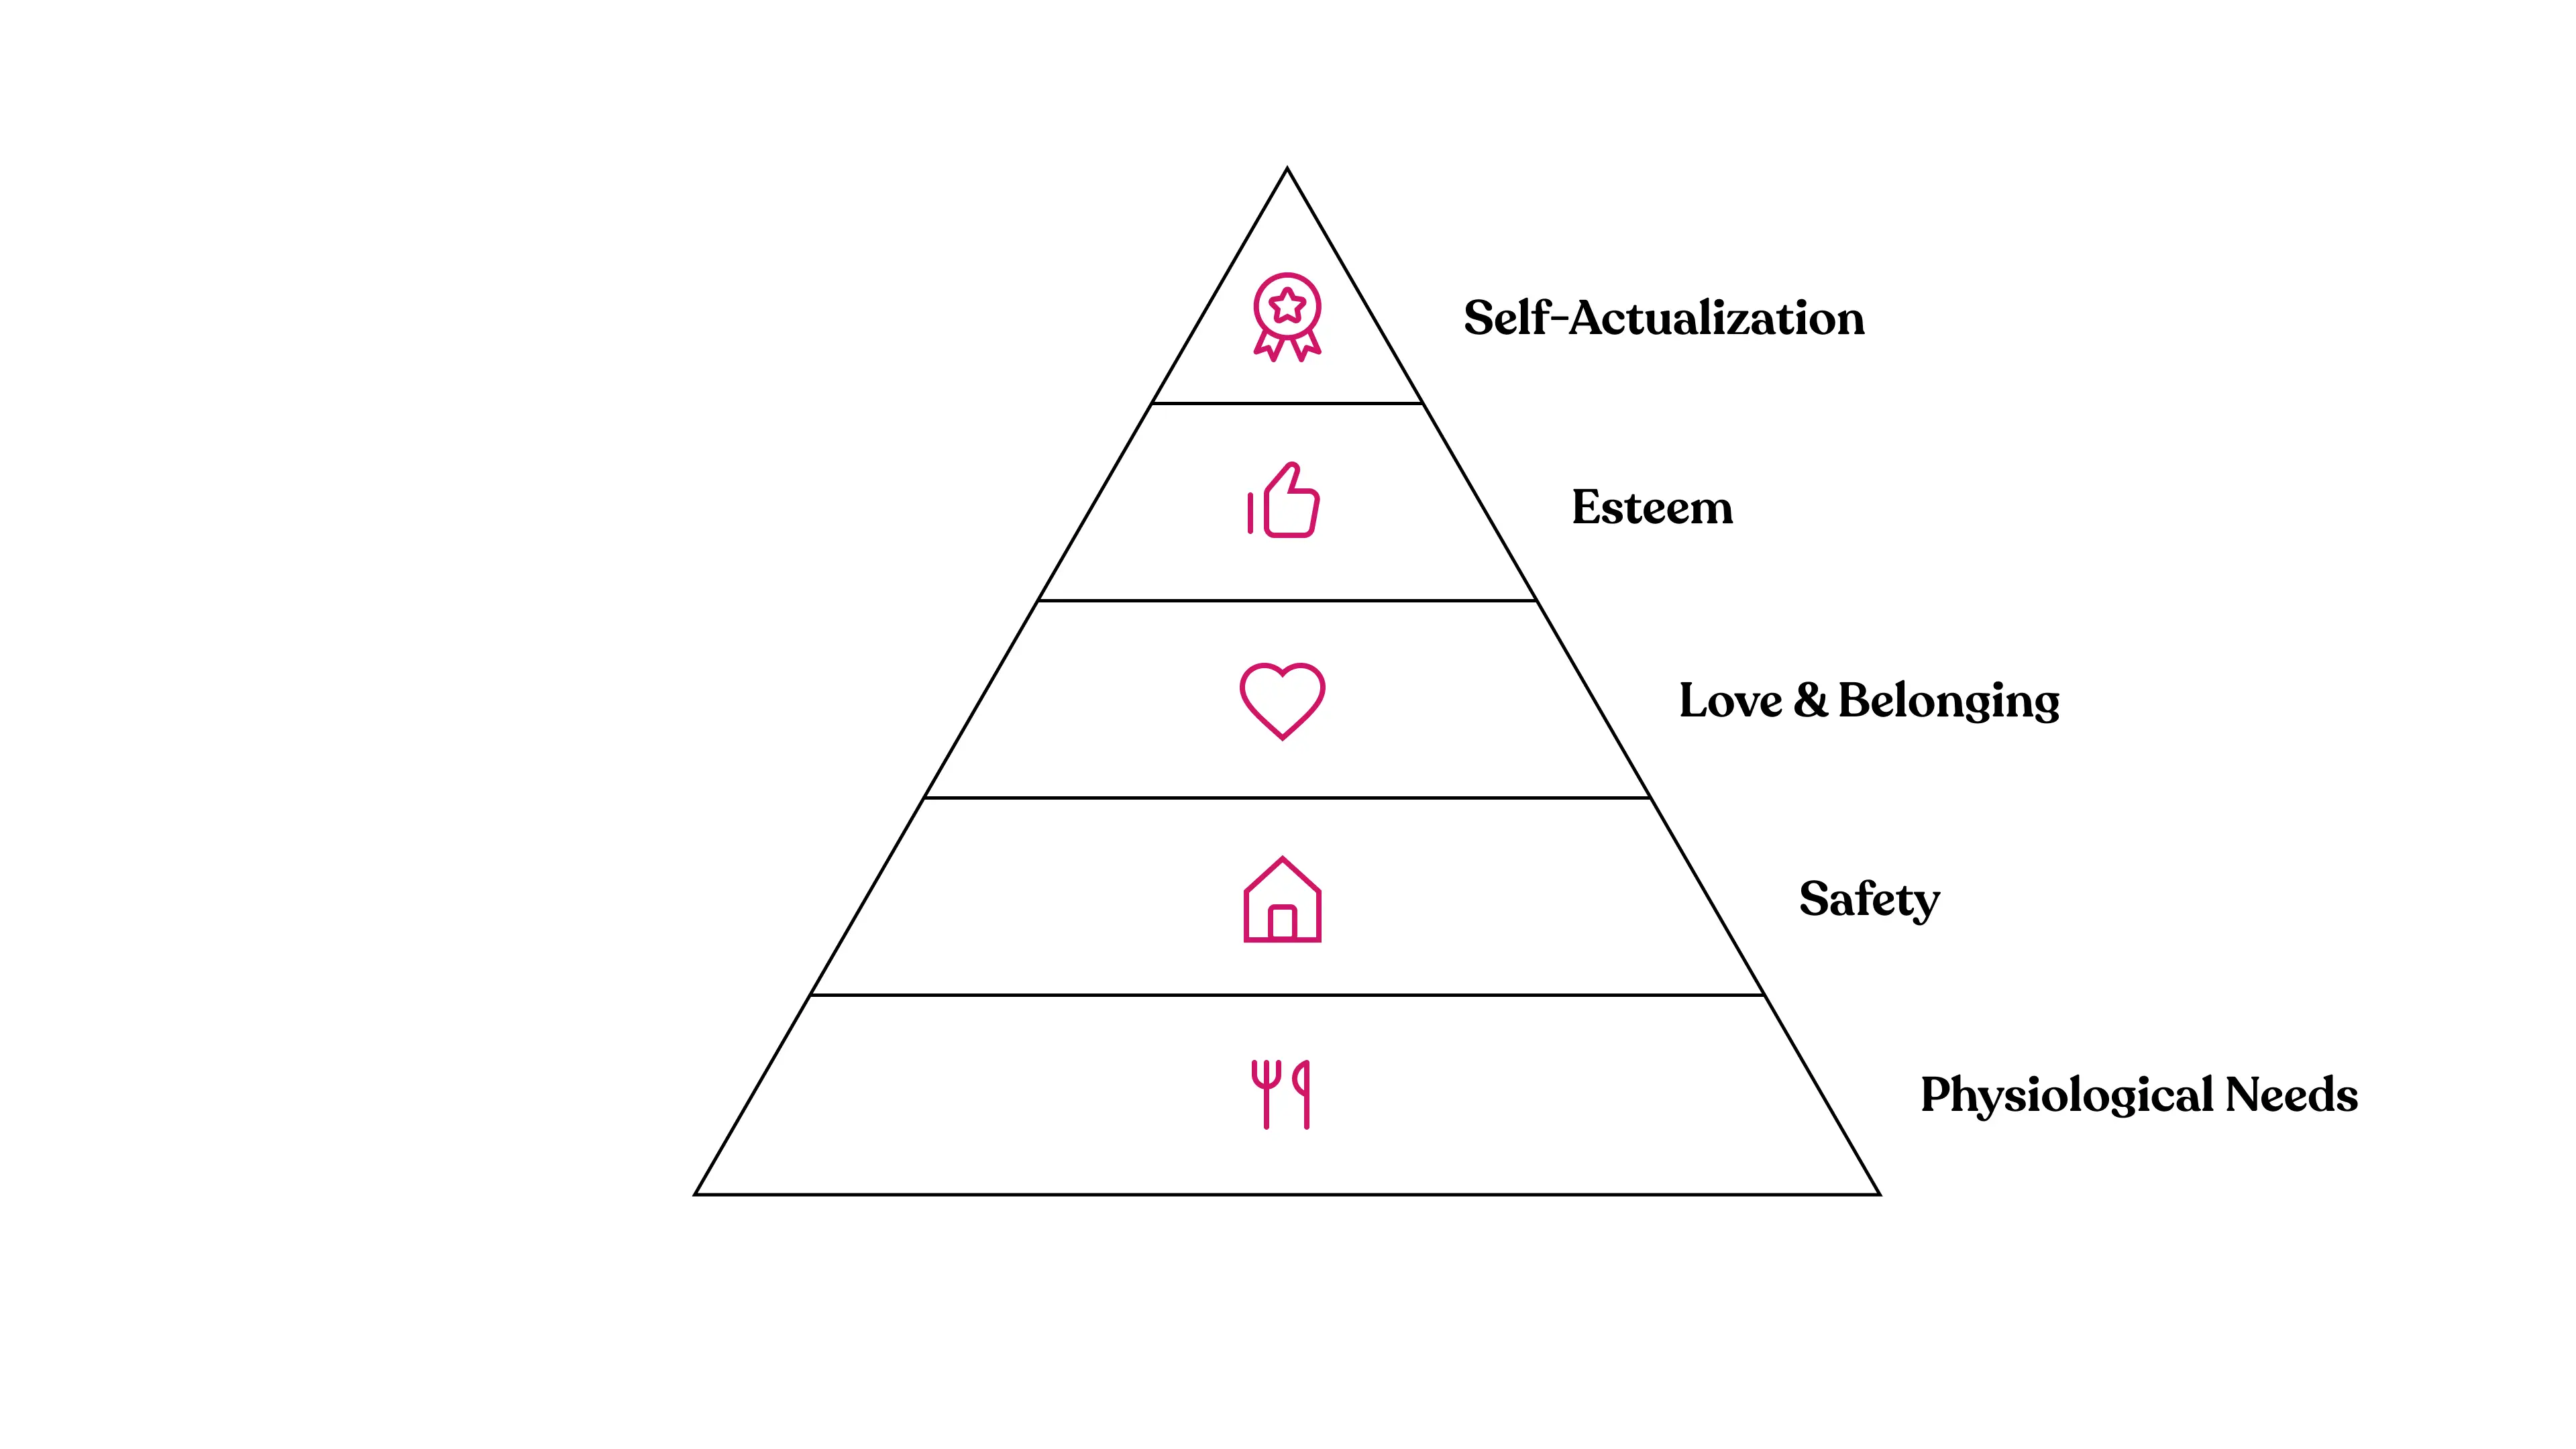 White image of a pyramid to illustrate Mazlow's Pyramid of Needs